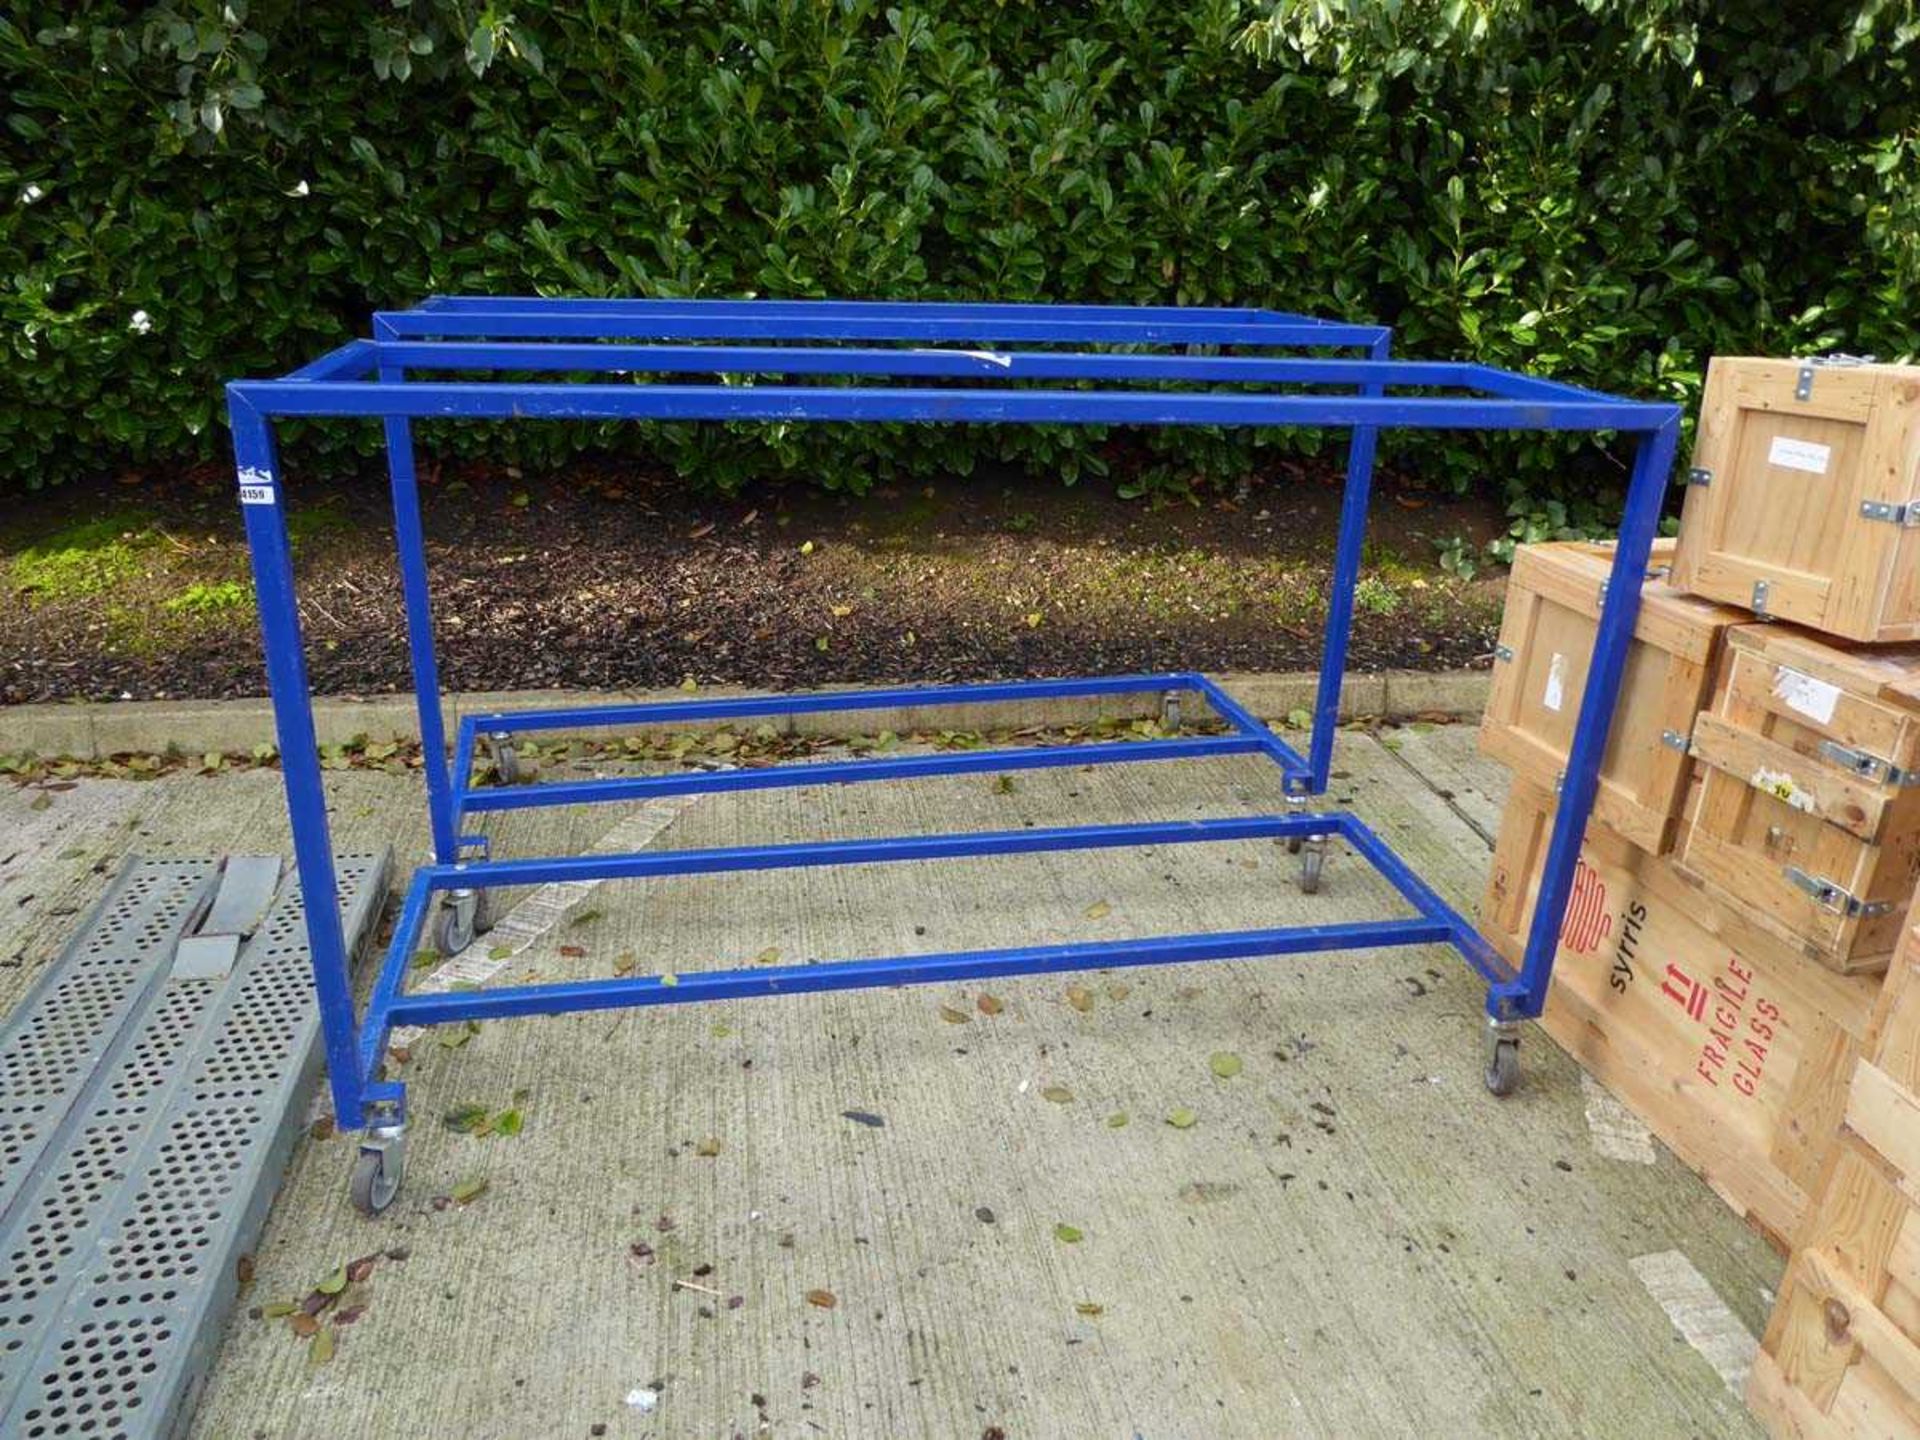 Pair of mobile workshop stands in blue